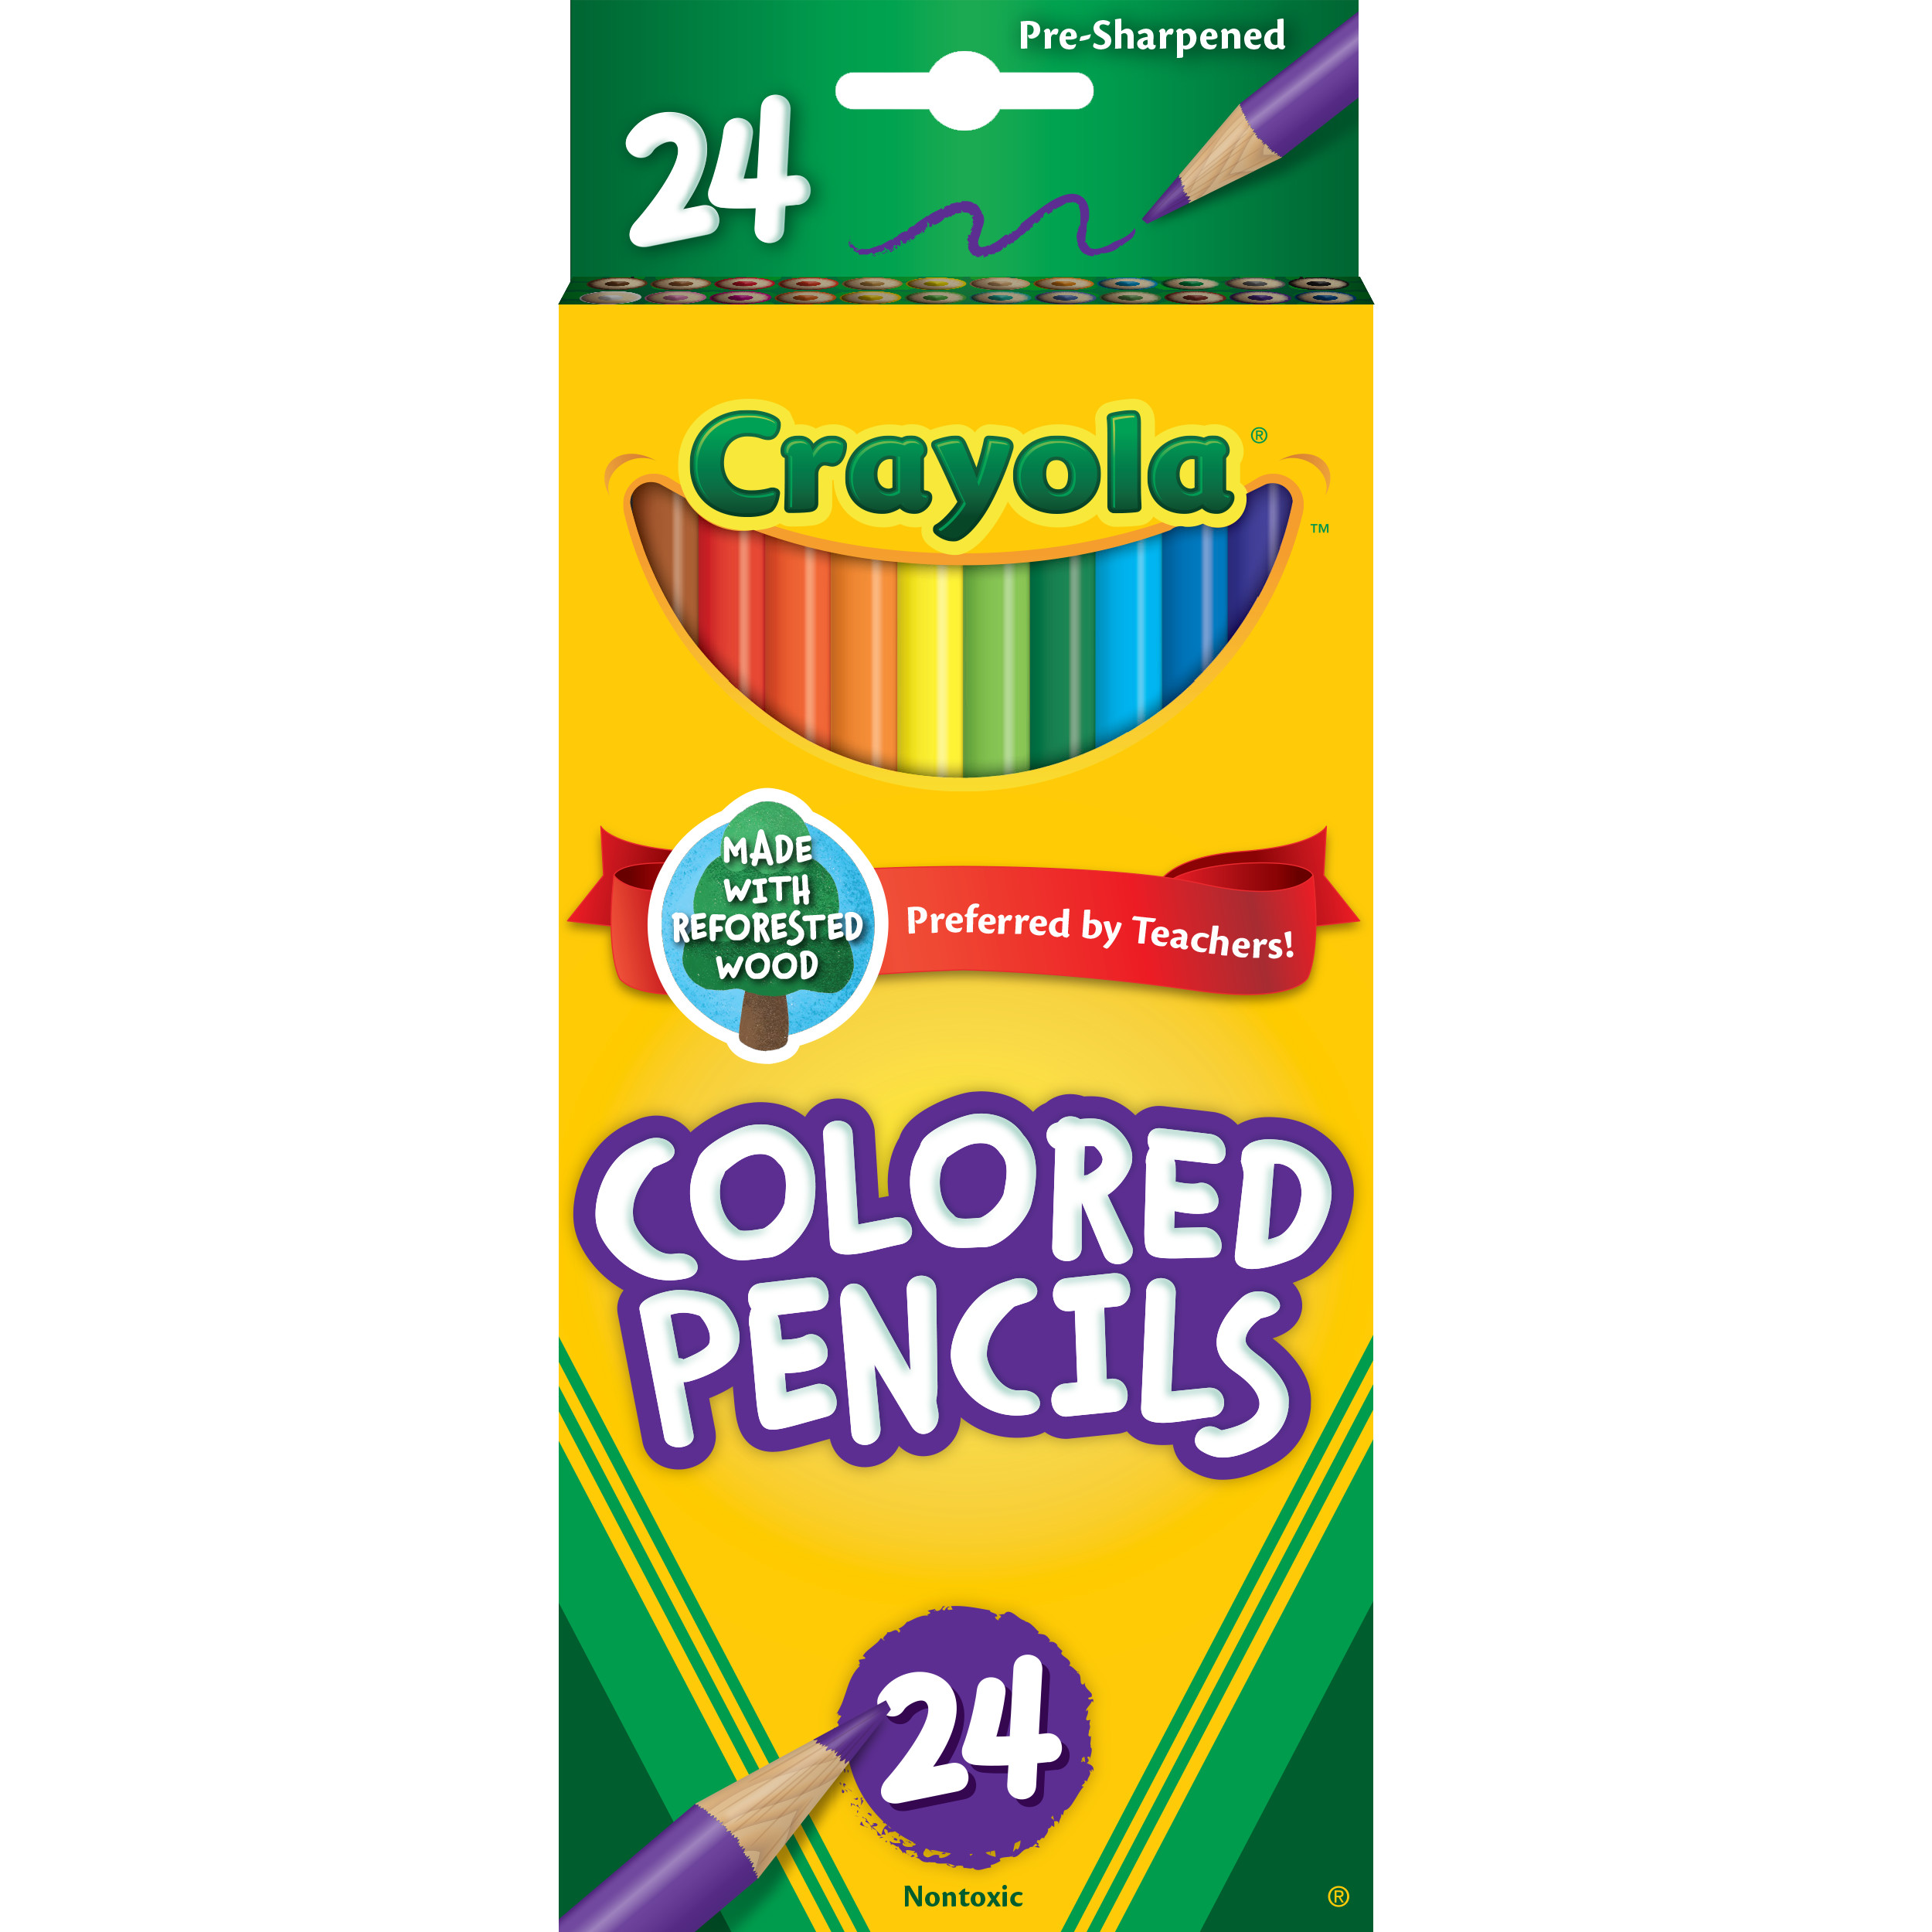 Crayola Colored Pencils, Assorted Colors, Pre-sharpened, Adult Coloring, 24 Count - image 1 of 8